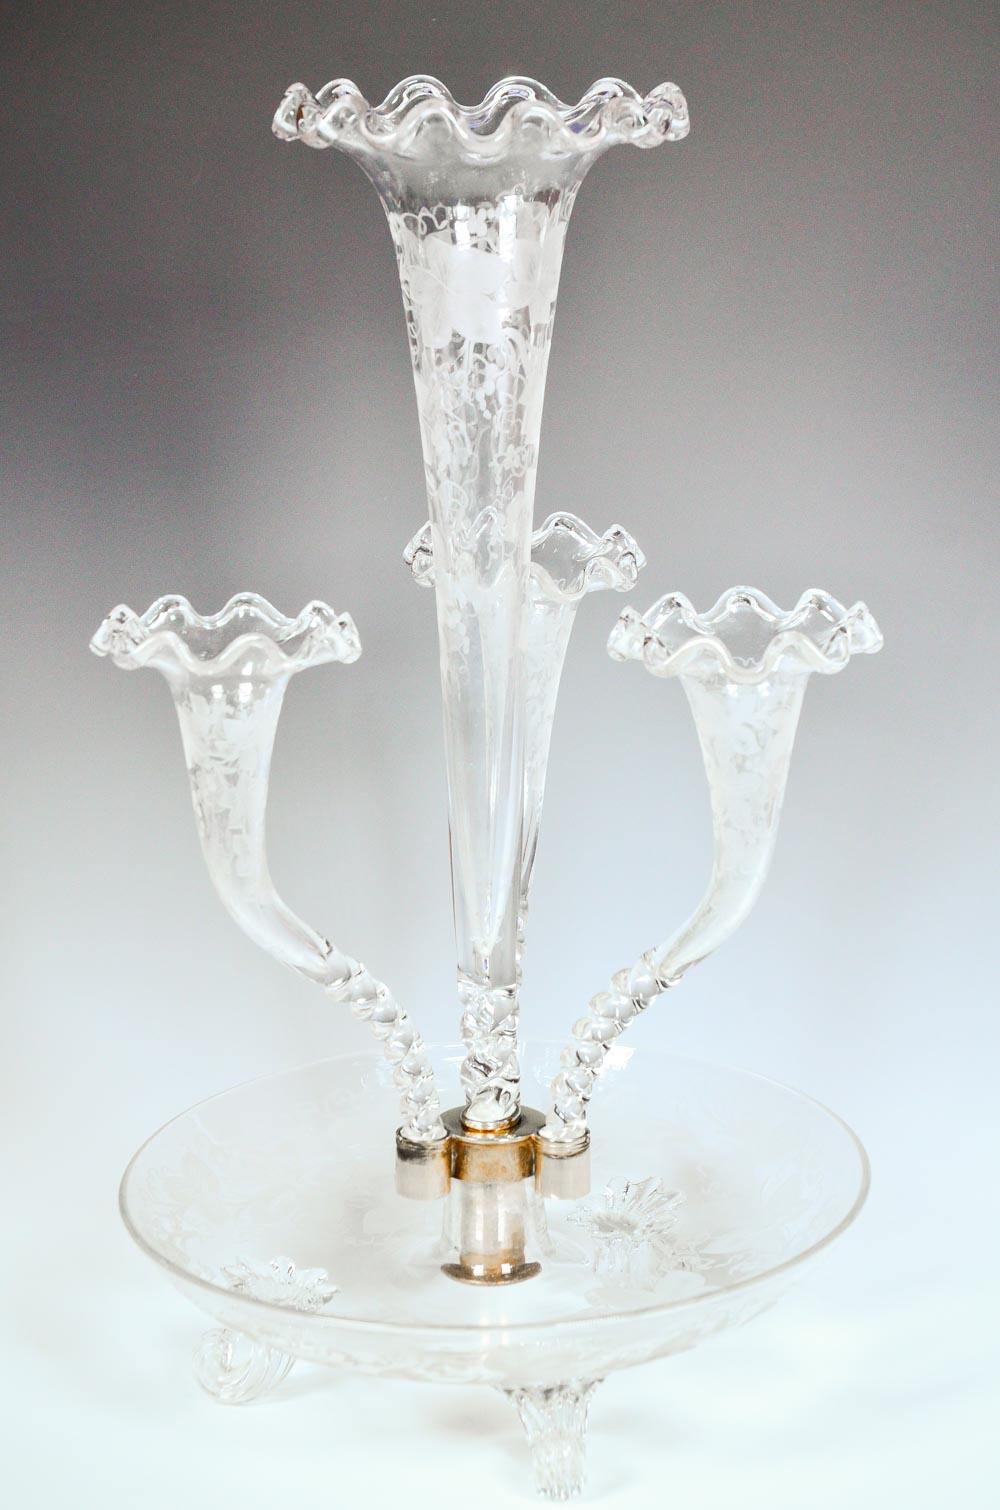 This is an exceptional example of an English epergne featuring a tall center vase surrounded by 3 curved trumpets. Each piece is hand blown and decorated with copper wheel engraved grapes and vines with foliage. The openings are embellished with